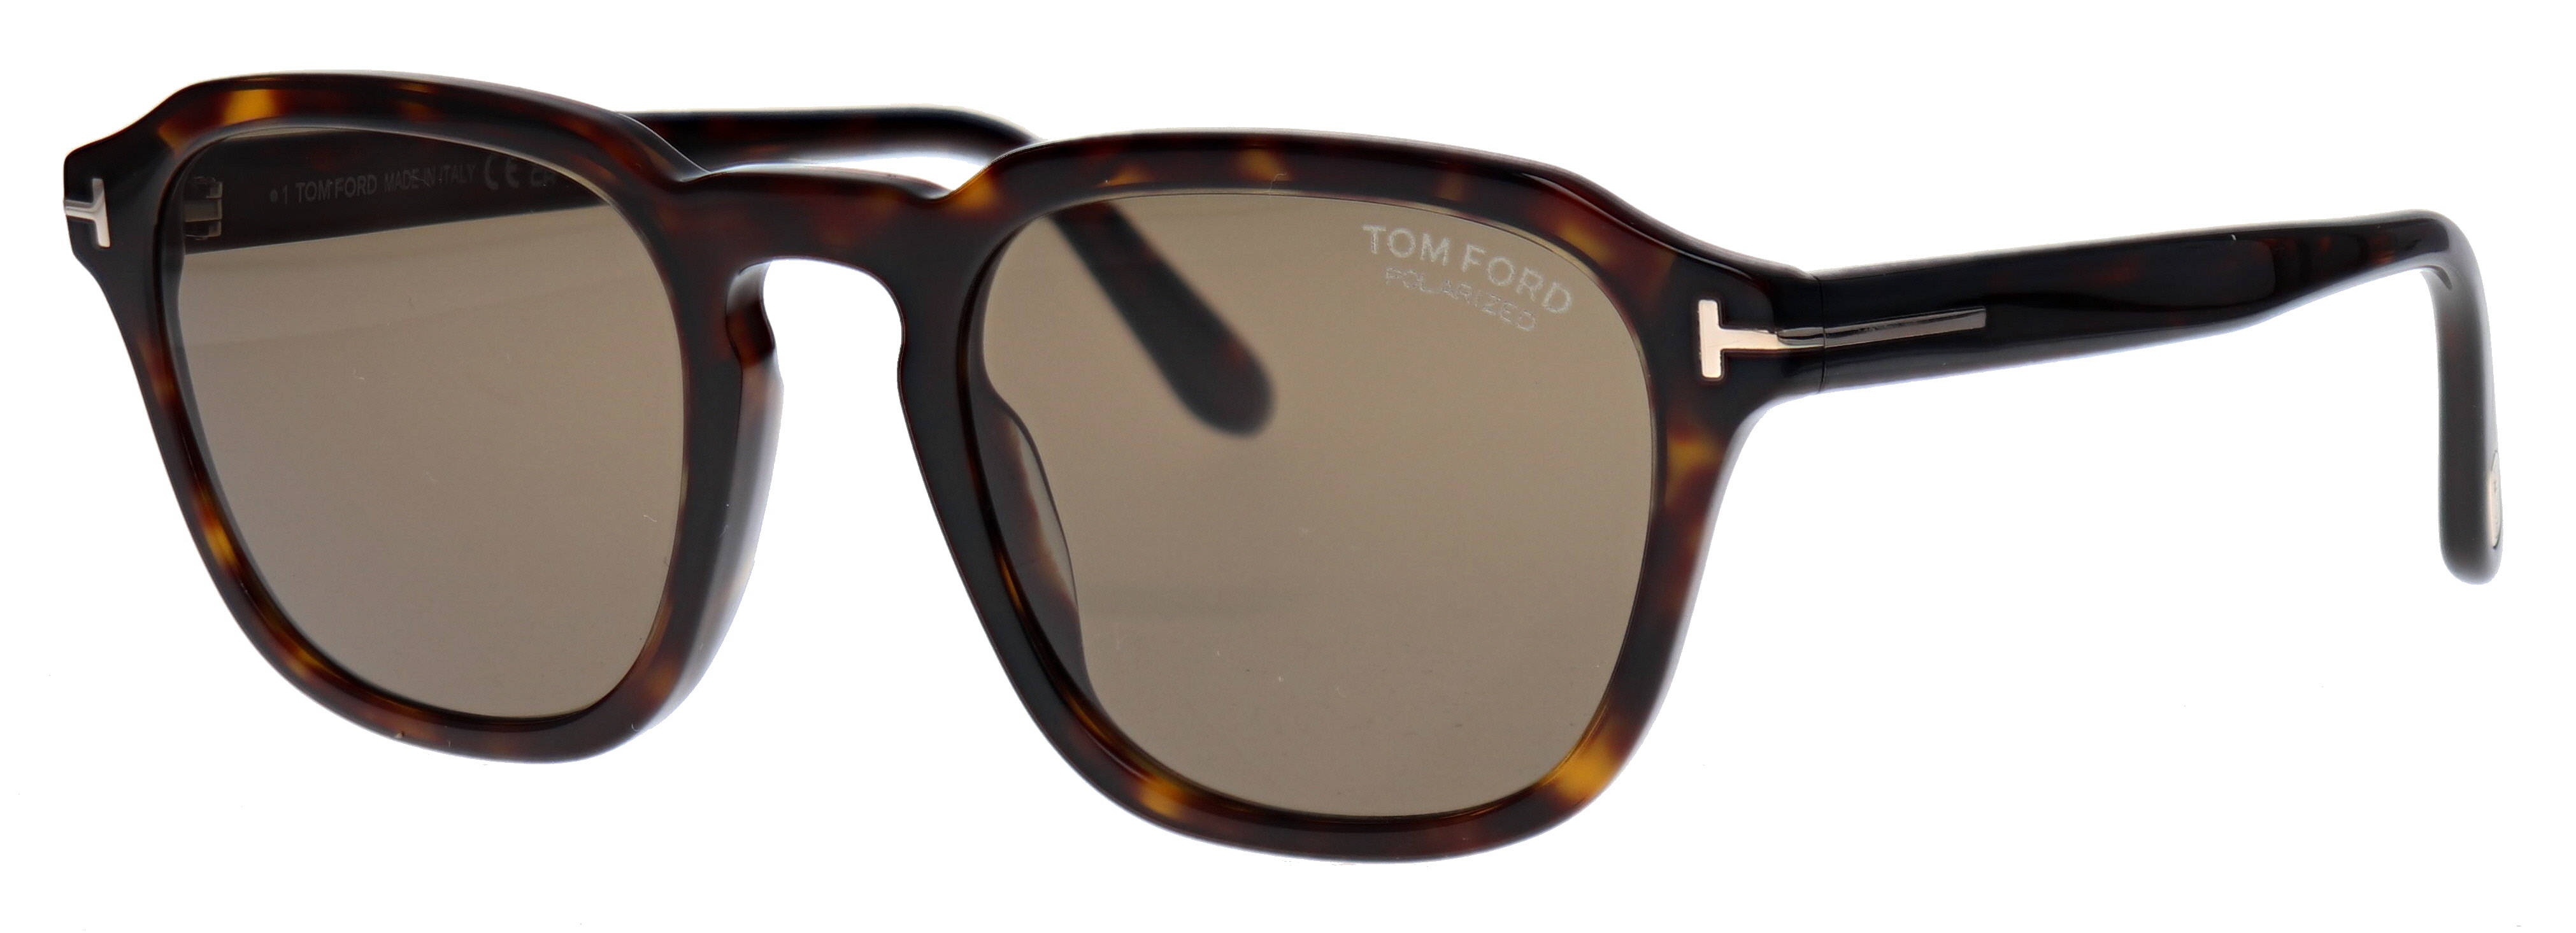 Tom Ford Avery TF931 Polorized